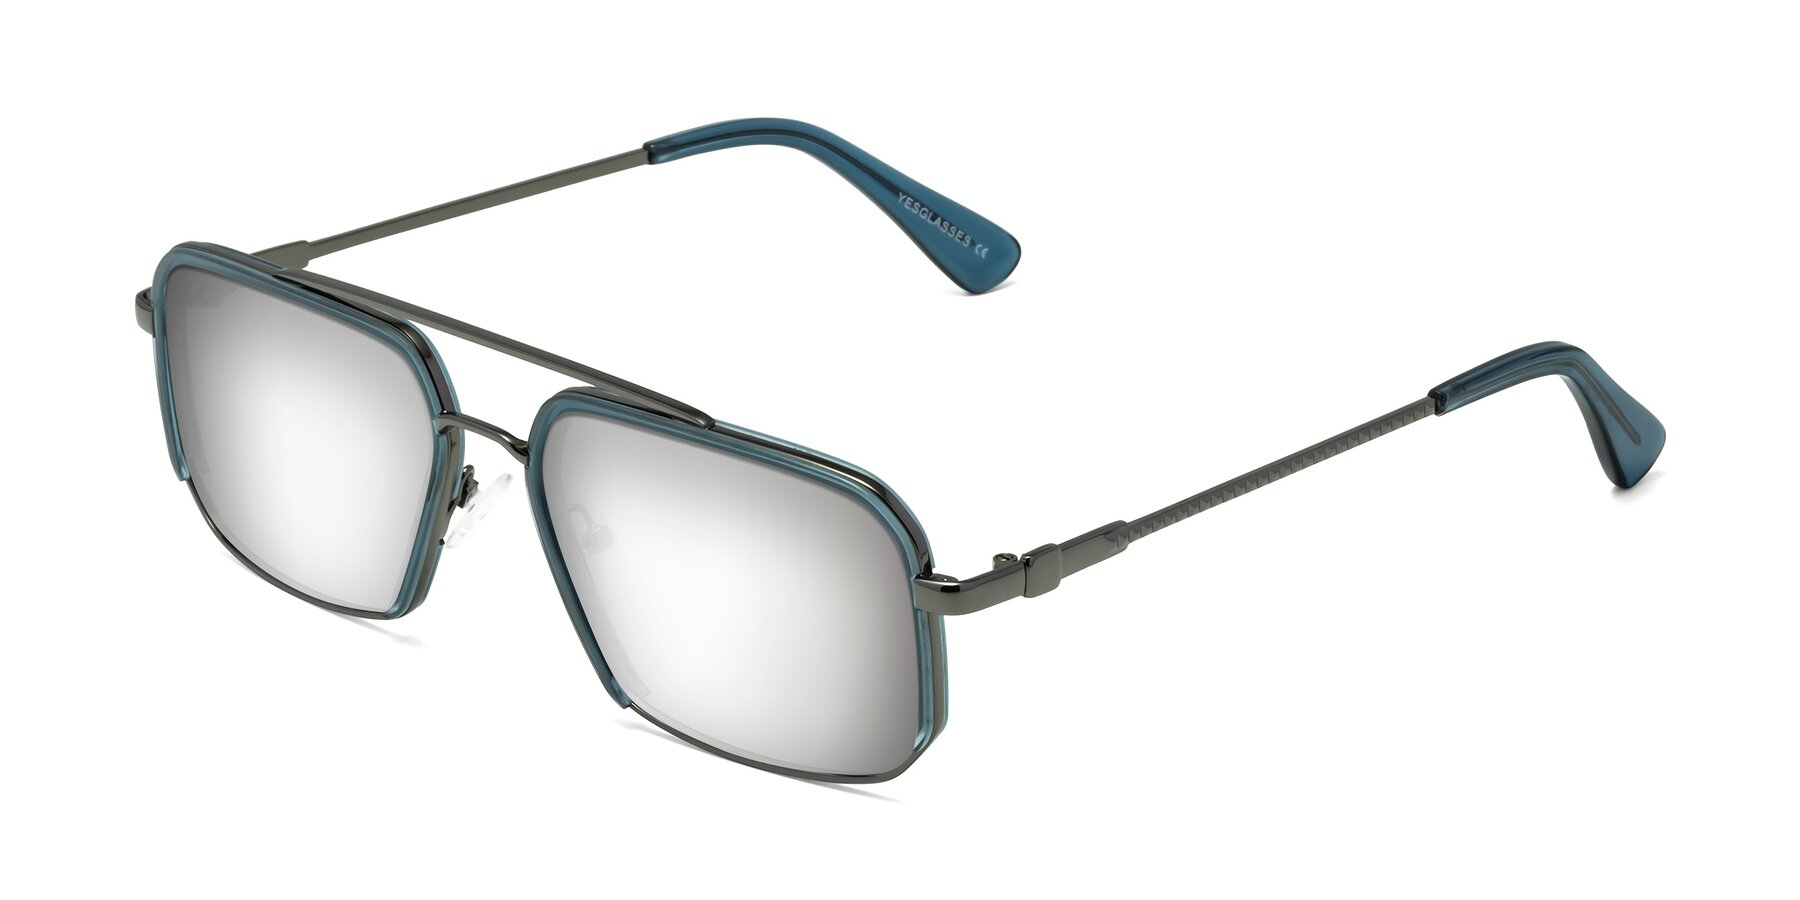 Angle of Dechter in Teal-Gunmetal with Silver Mirrored Lenses